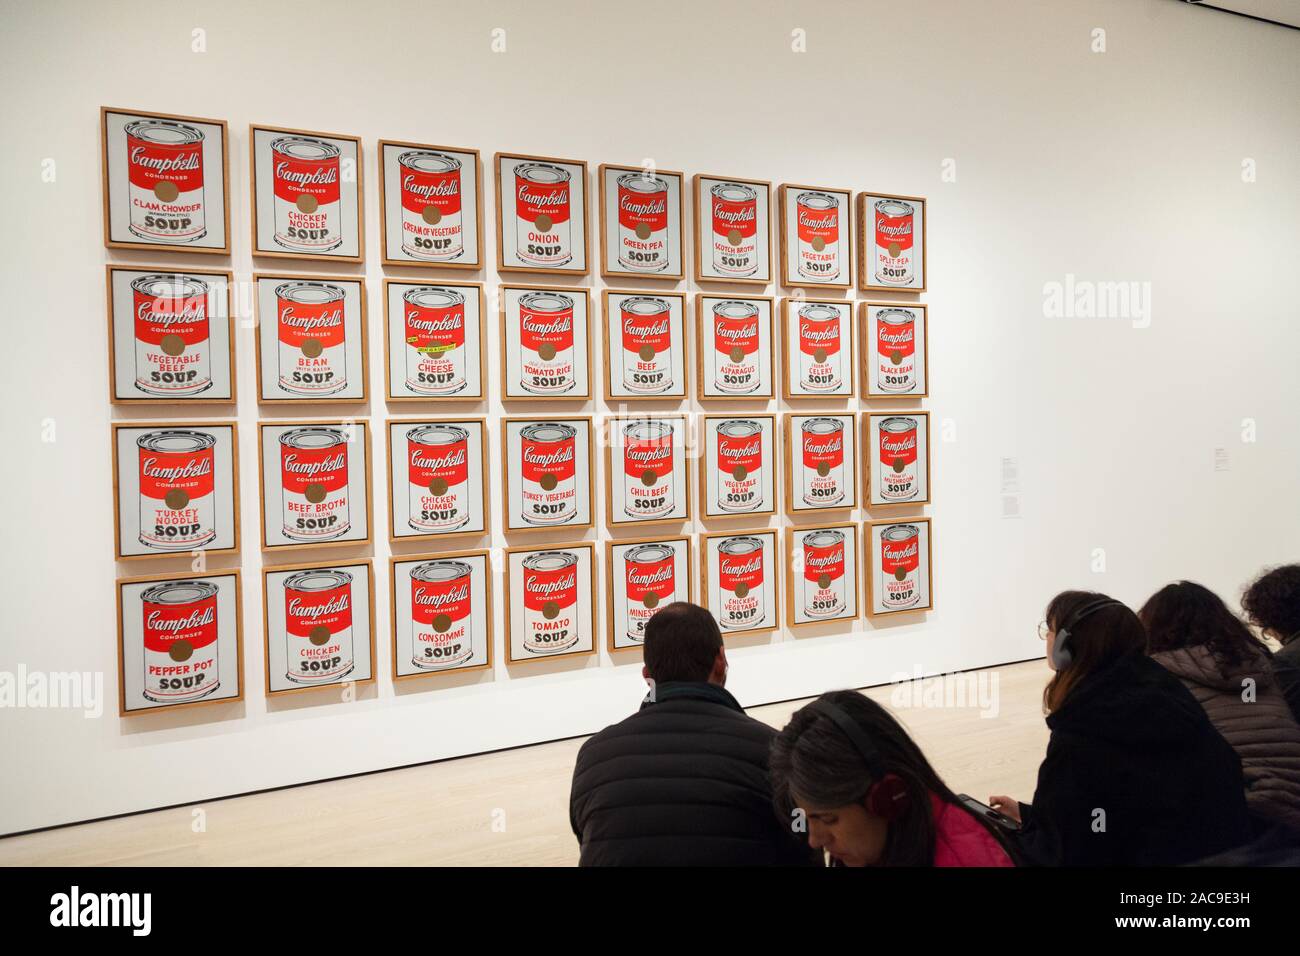 Andy Warhol,Campbell's soup cans paintings (1962) MoMa museum of modern art, New York City, United States of America. Stock Photo